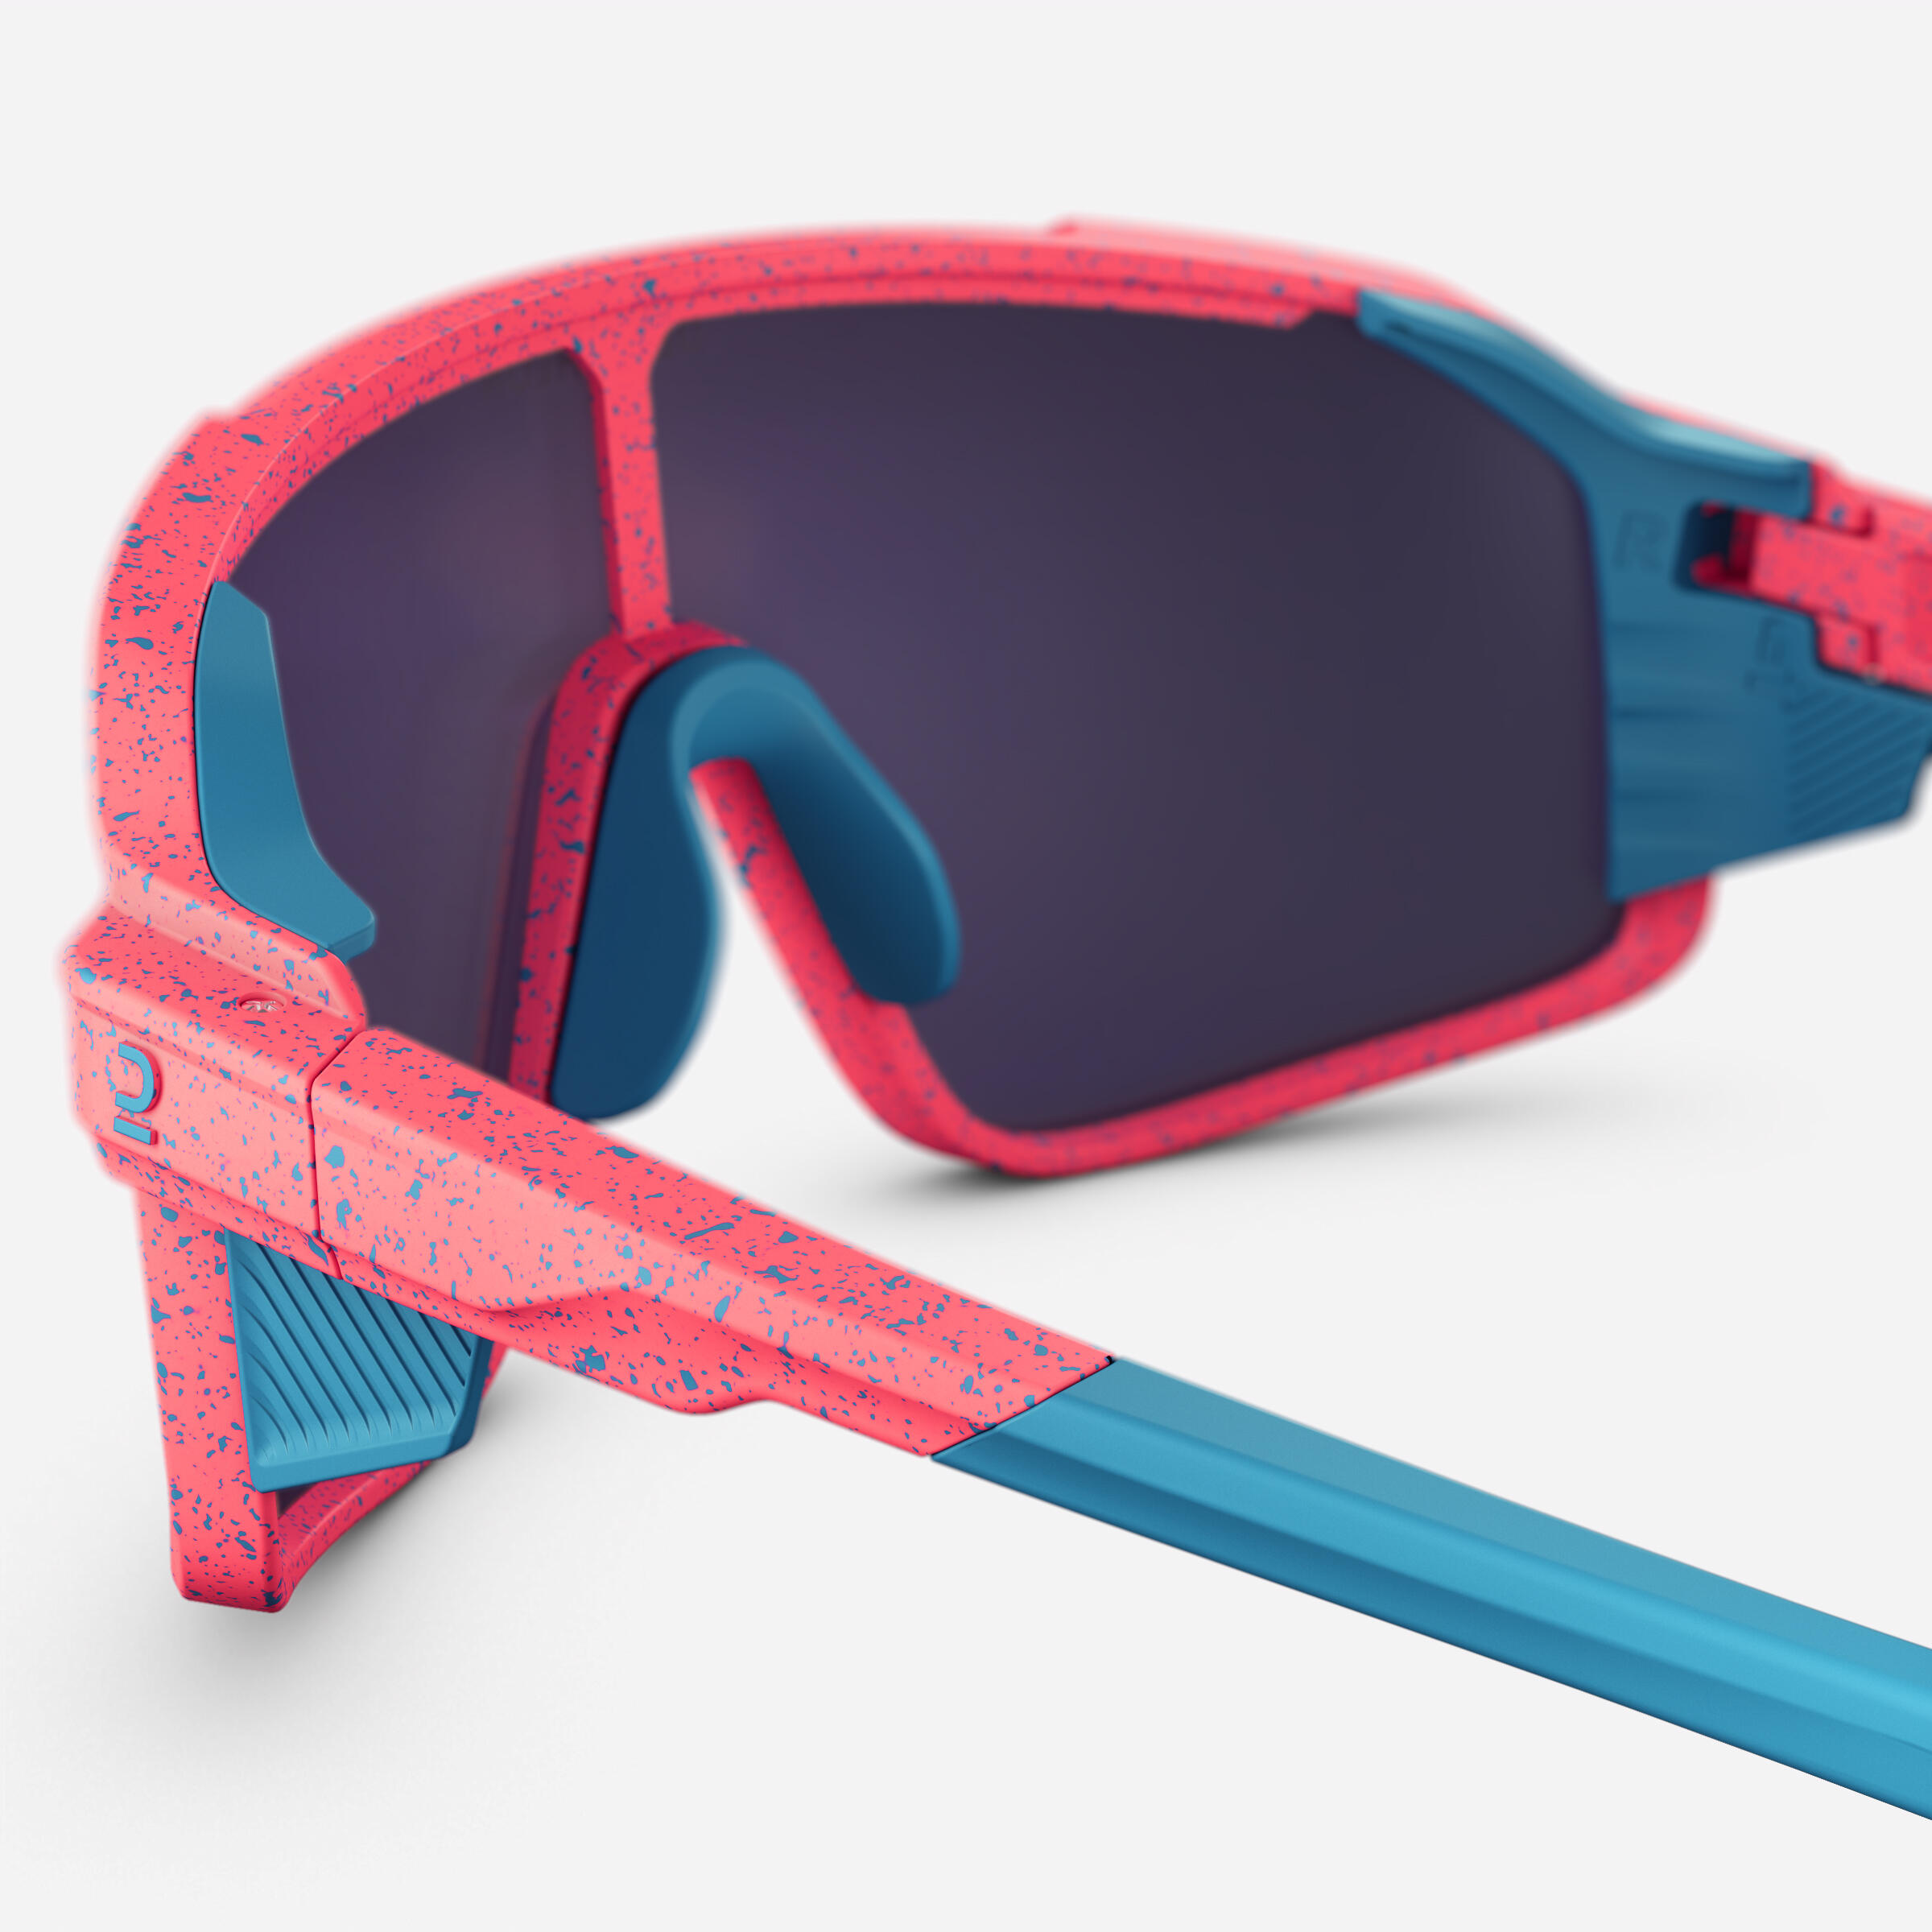 SUNGLASSES MH900 Category 4 Full LENS High Definition - Pink 5/9